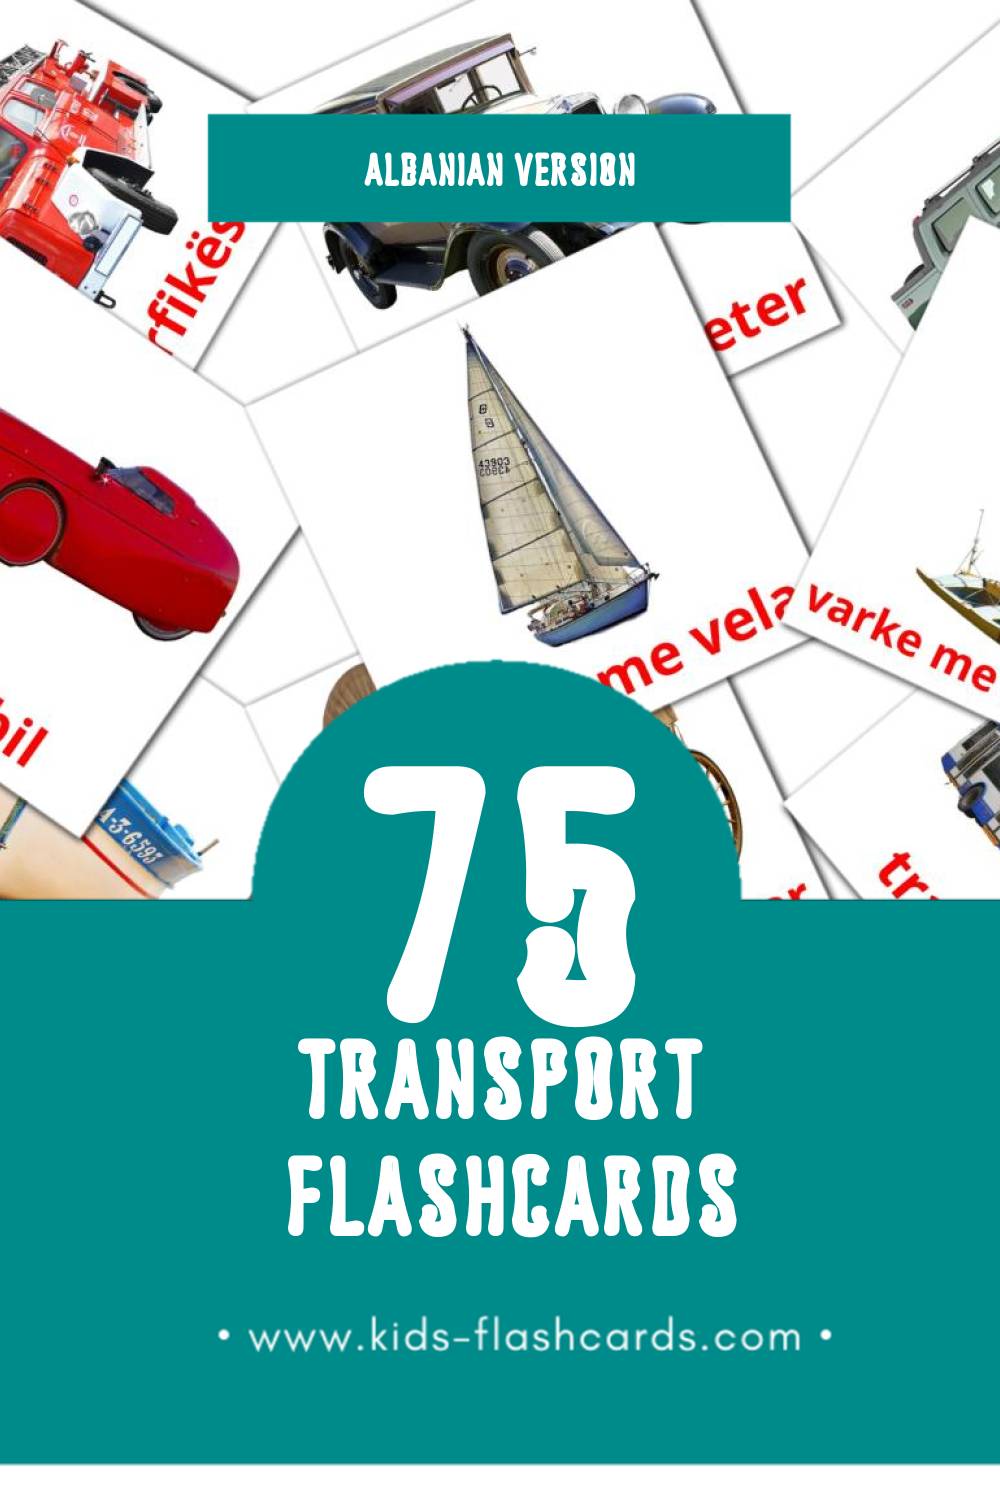 Visual Transporti Flashcards for Toddlers (76 cards in Albanian)